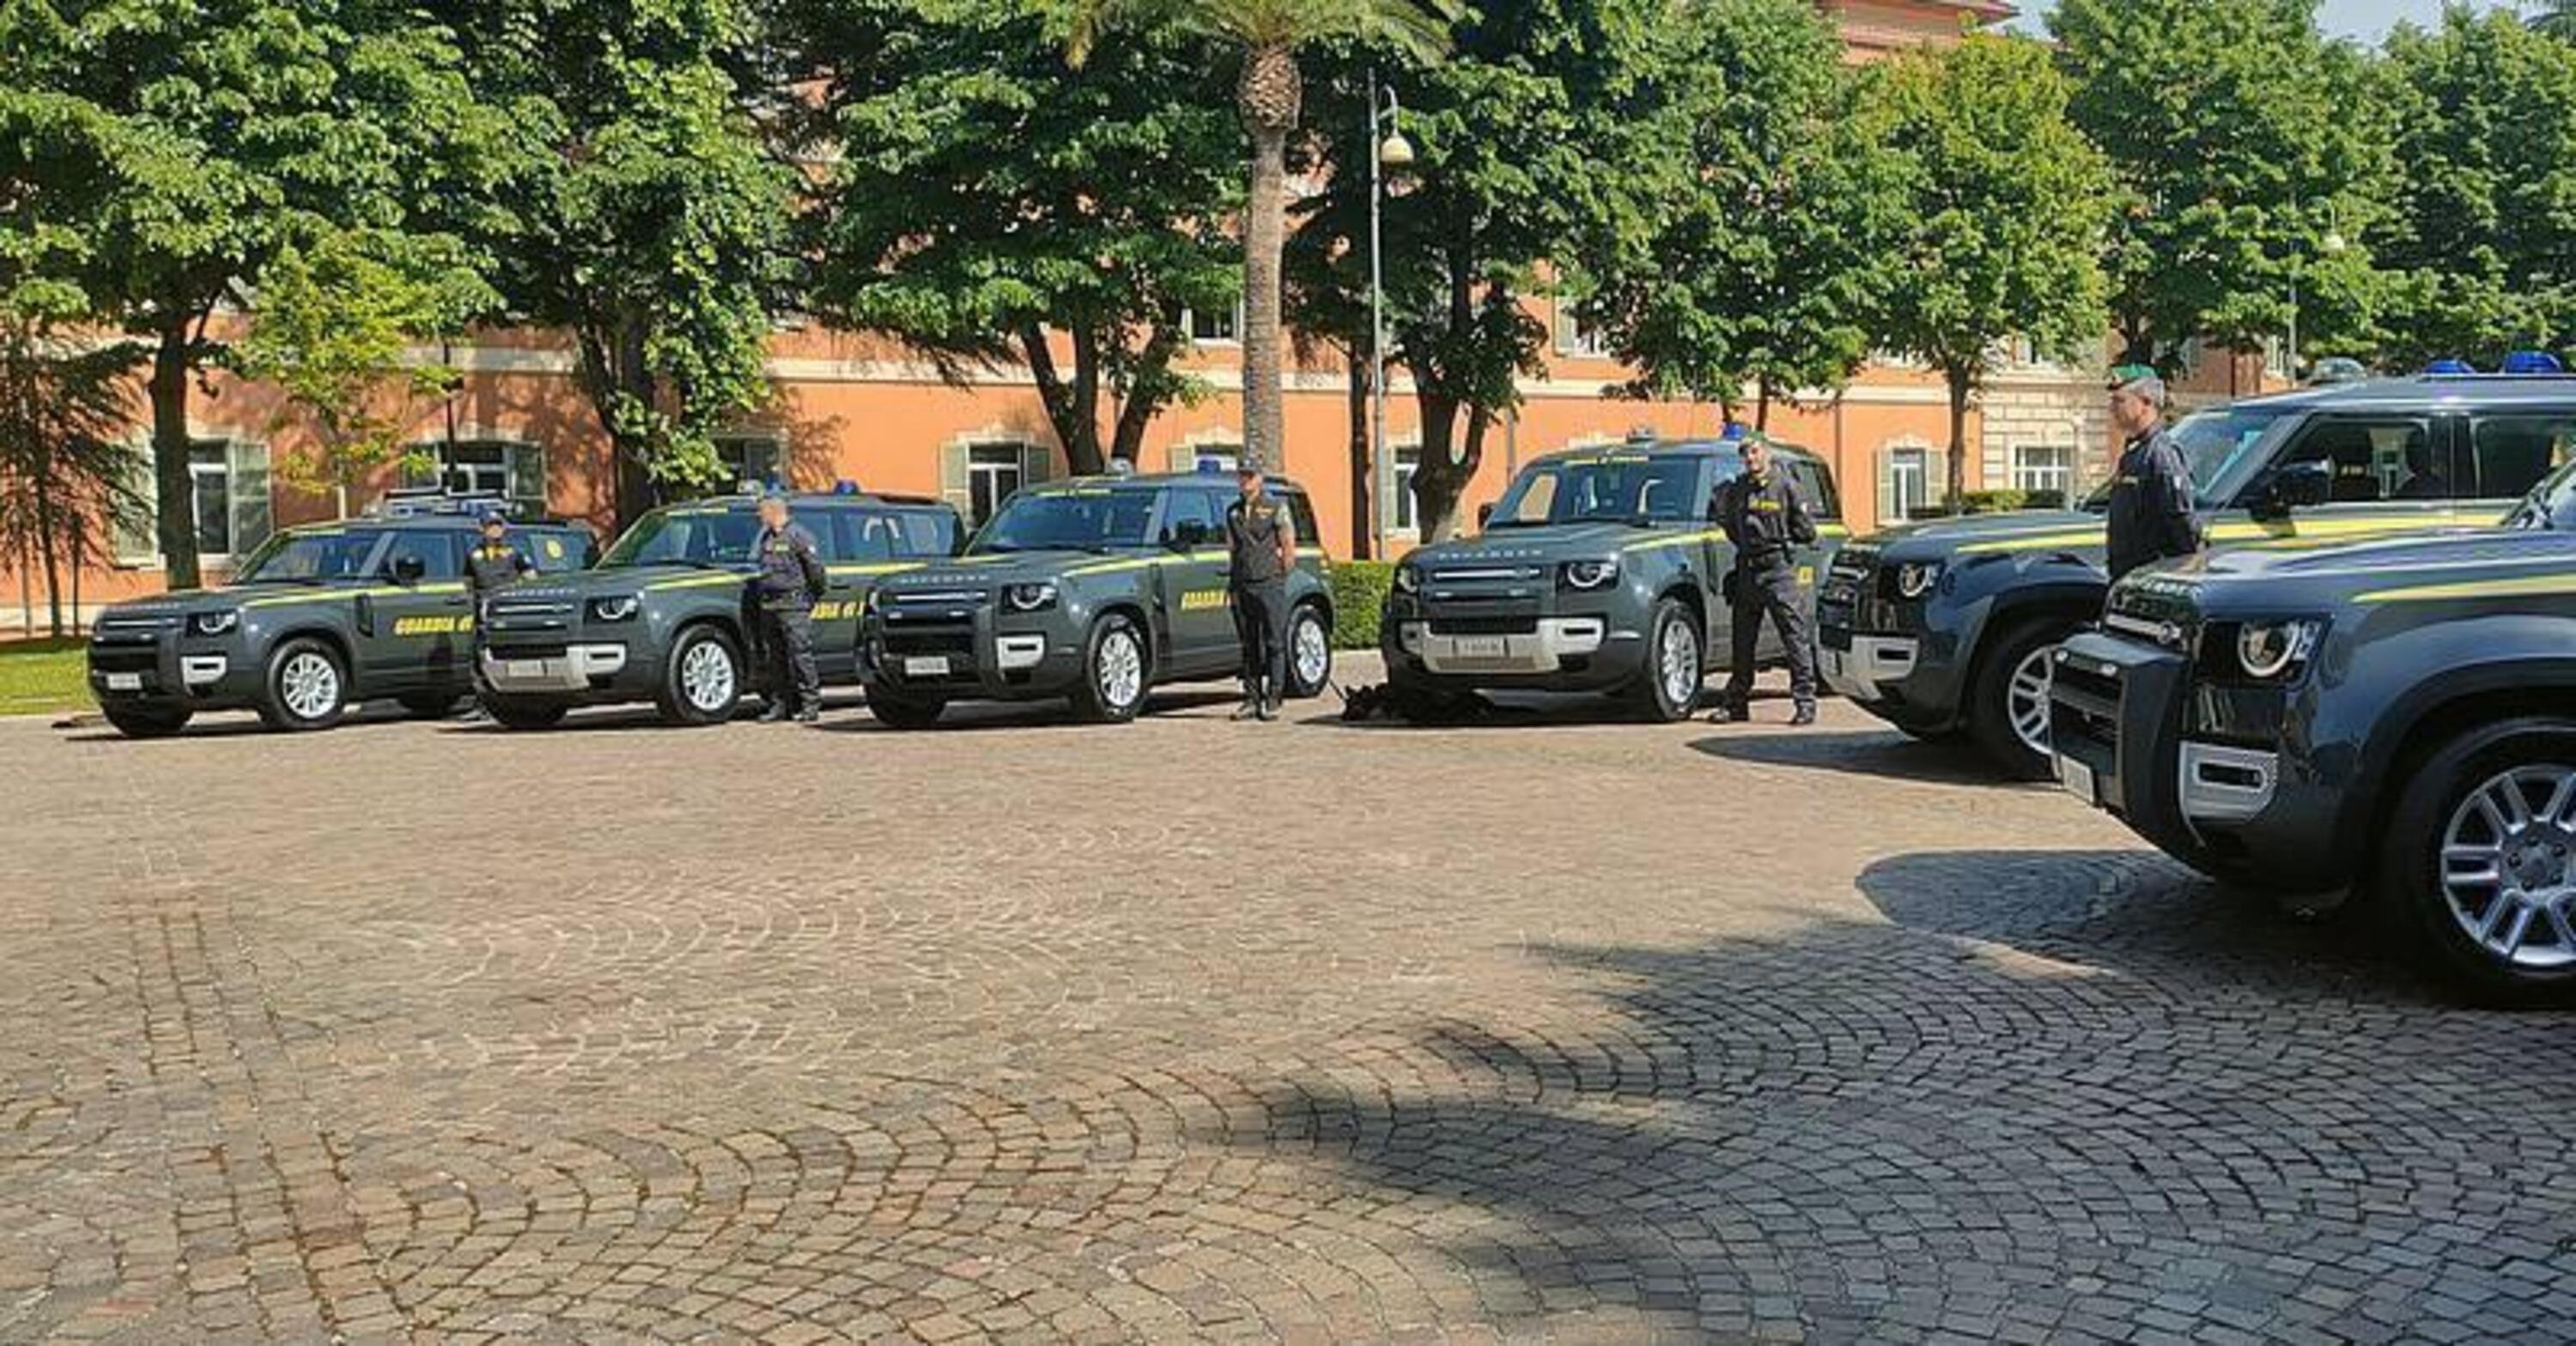 50 nuove Land Rover Defender alle Fiamme Gialle